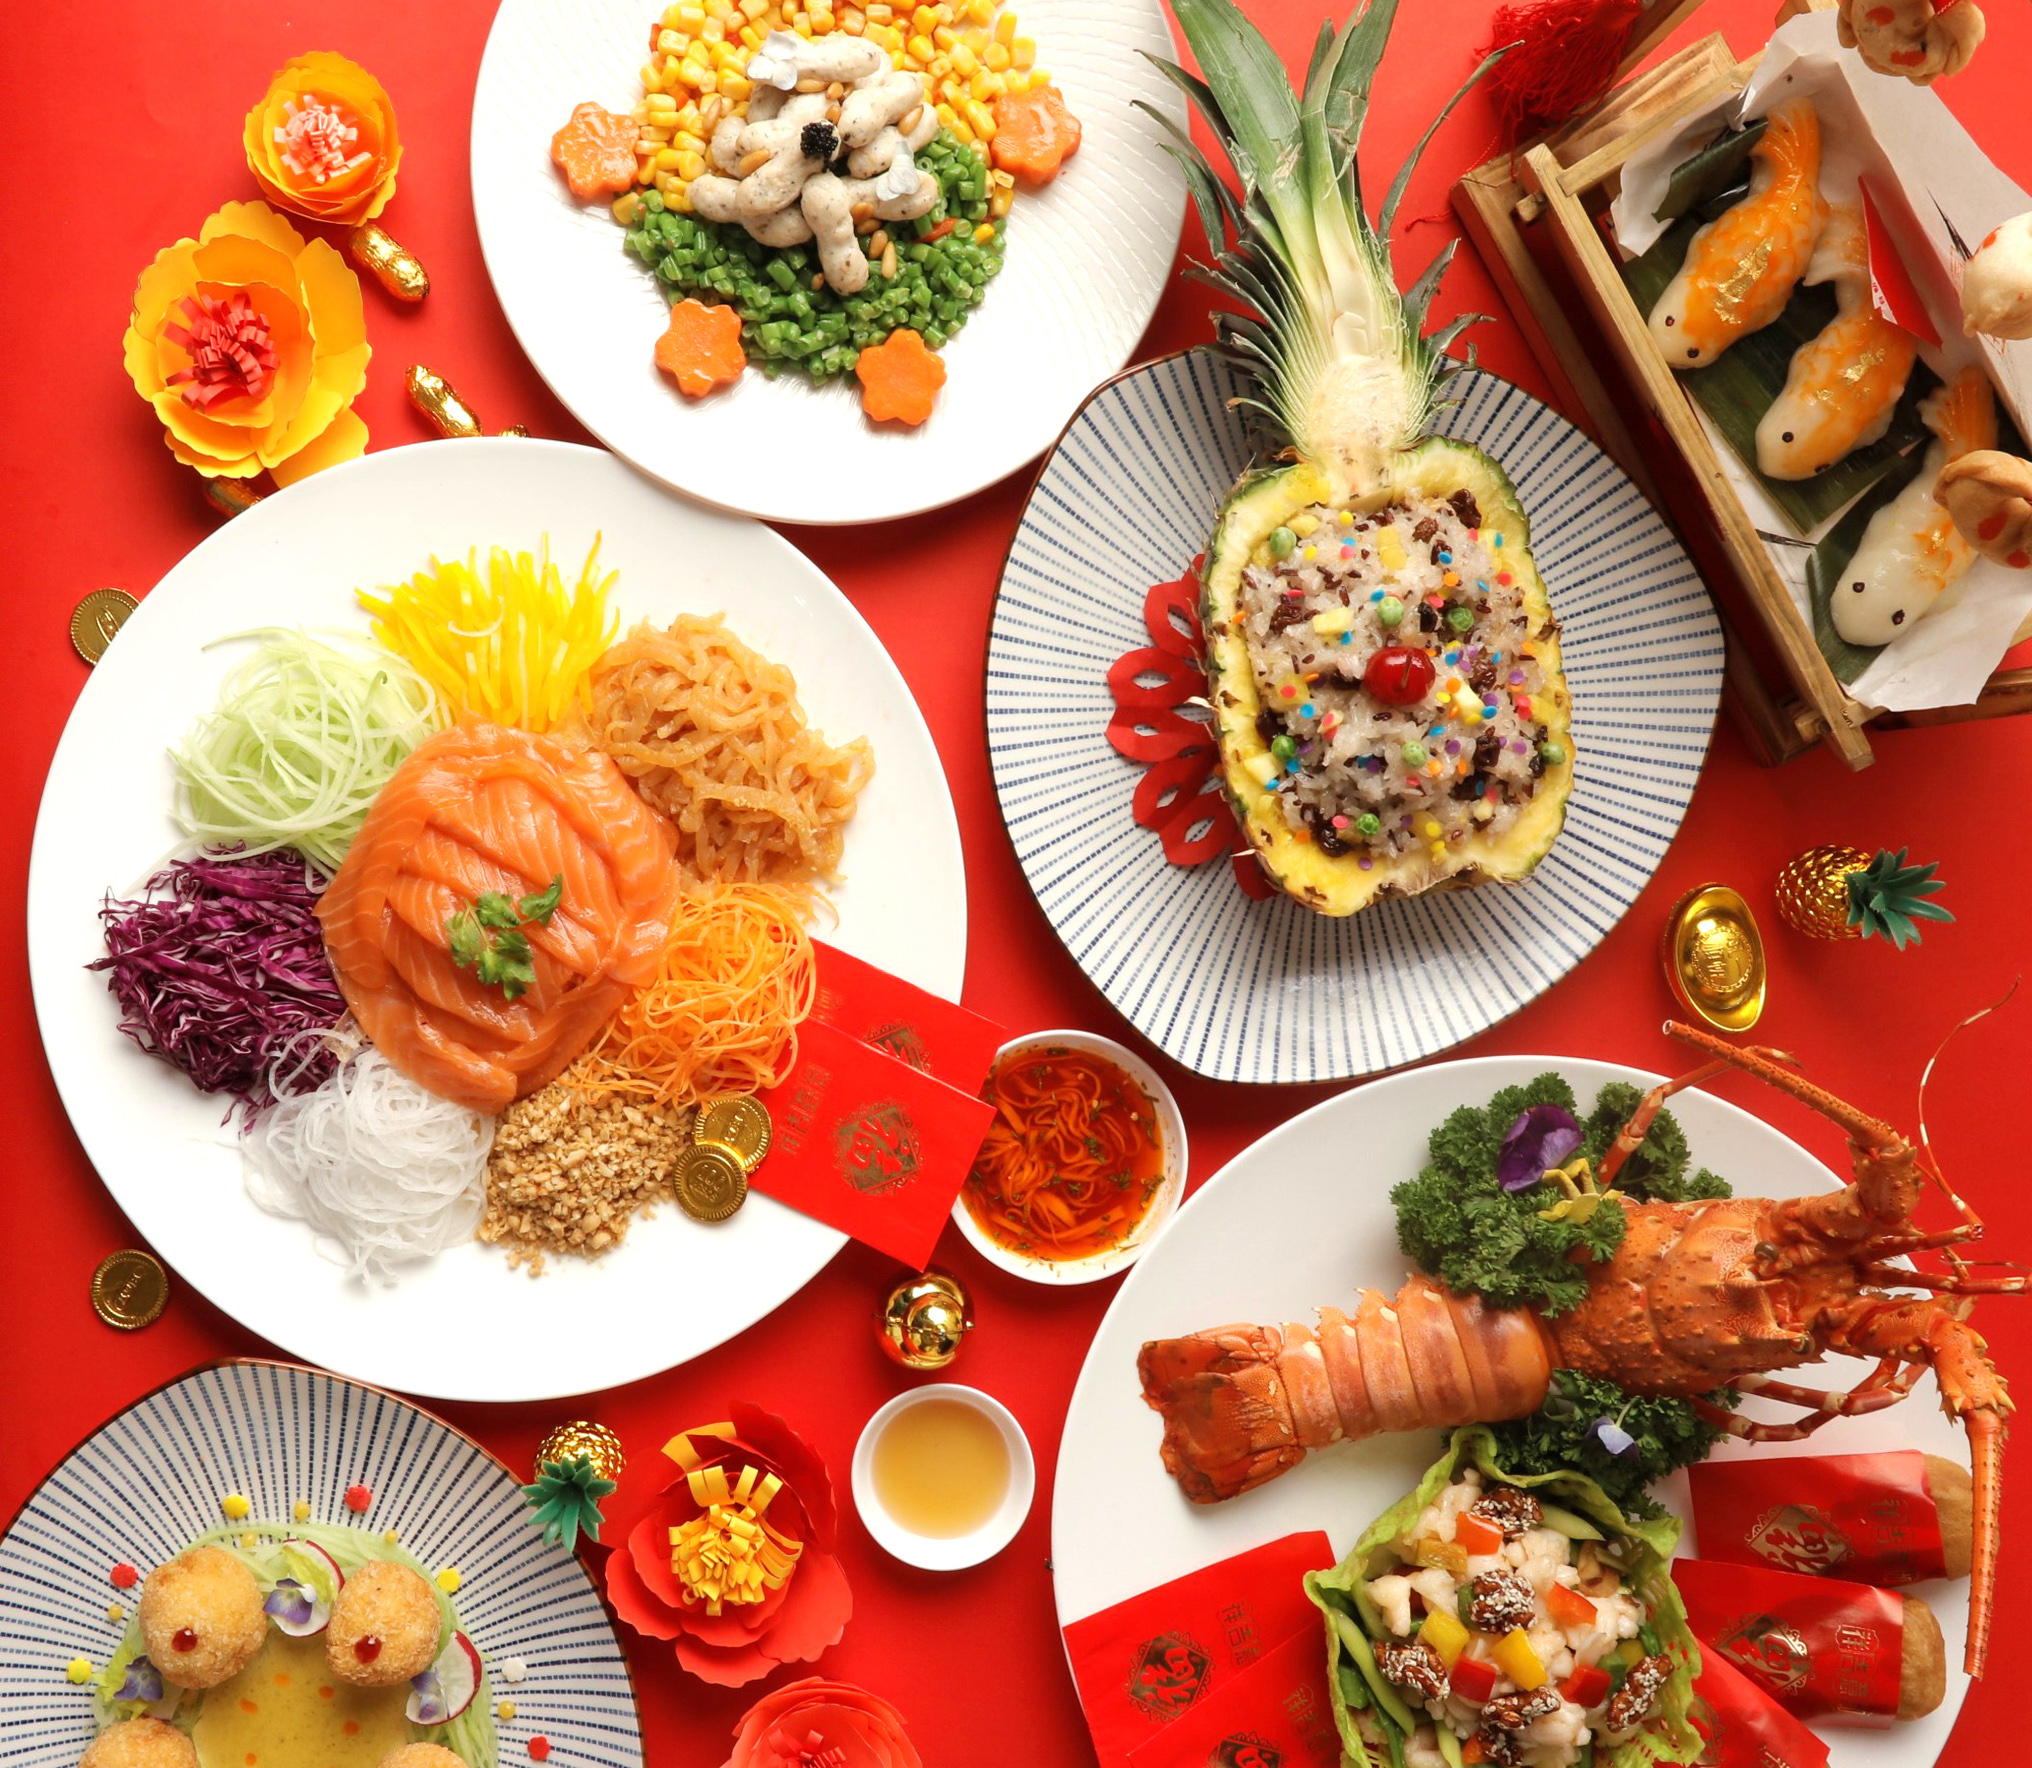 Five spots to visit this Lunar New Year